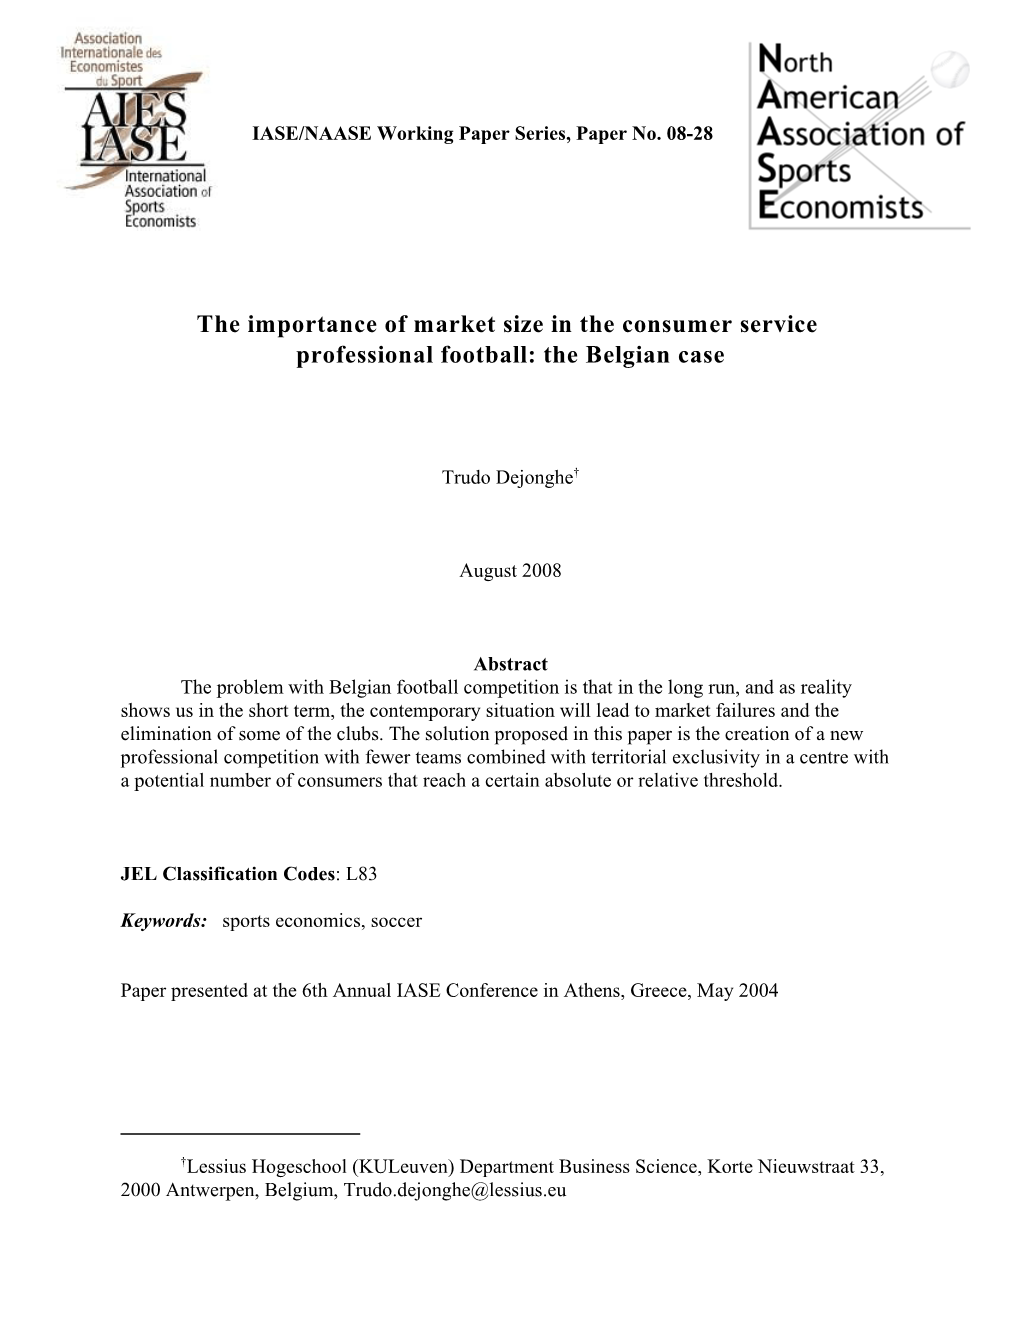 The Importance of Market Size in the Consumer Service Professional Football: the Belgian Case